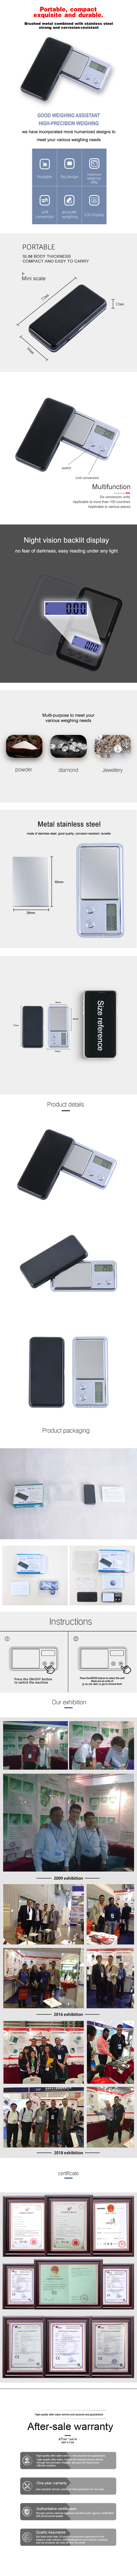 BDS-908|  Gold scale Pocket LCD Scale Digital gram scale Electronic palm scale Mini pocket scale BDS-908| Gold scale Pocket LCD Scale Digital gram scale Electronic palm scale Mini pocket scale Electronic palm scale,Digital gram scale,Gold scale,Mini pocket scale,Pocket LCD Scale